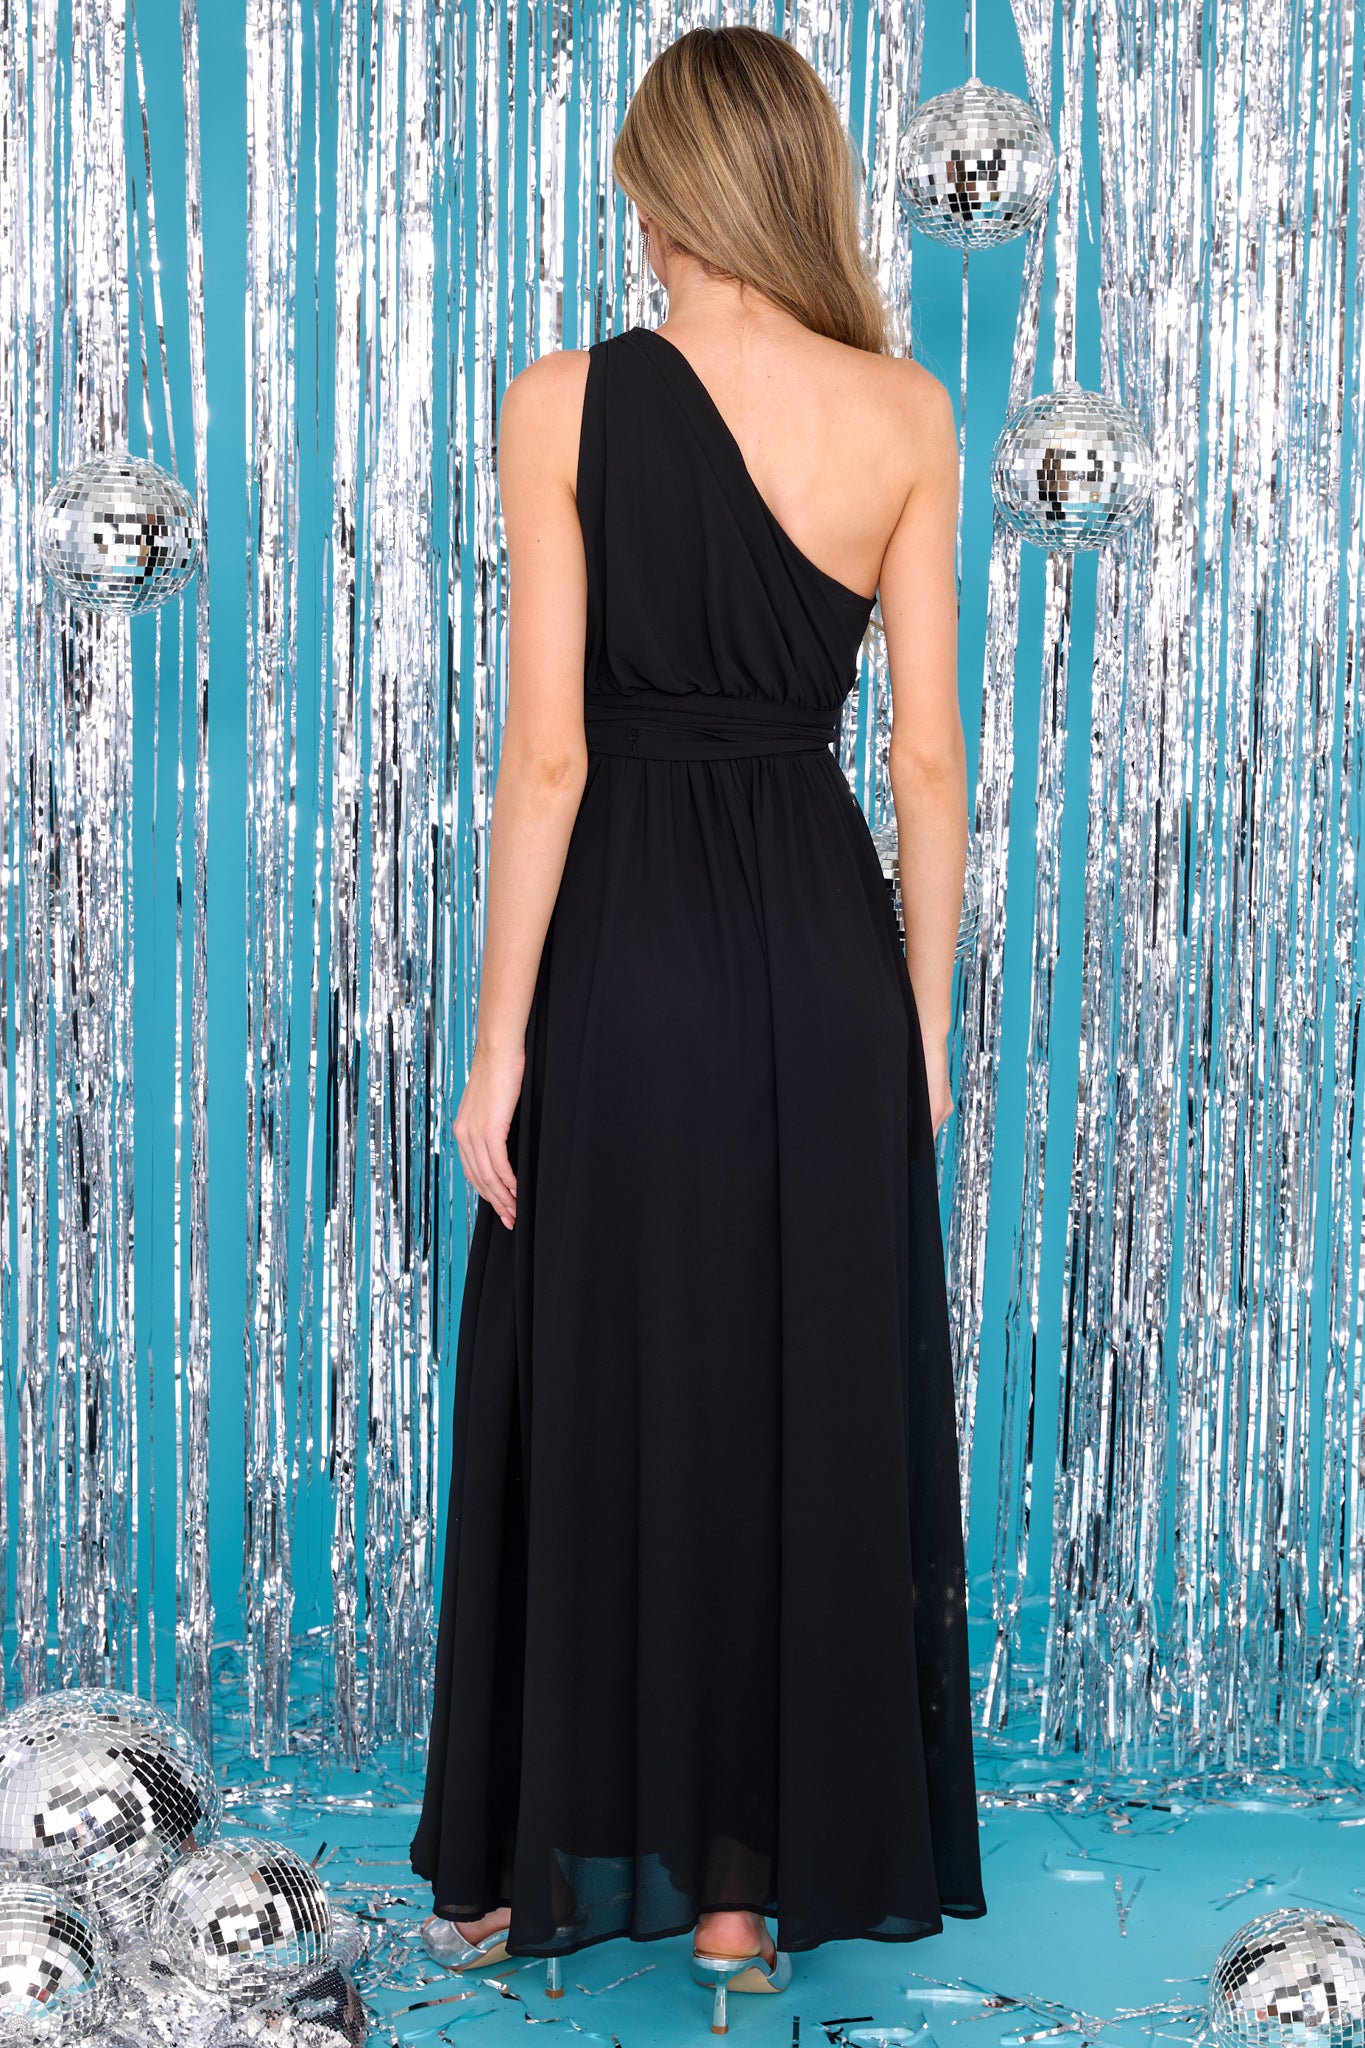 Back view of this dress that features a one-shoulder neckline with a non-slip rubber strip, a side zipper, an optional self-tie belt, a flowy skirt, and a slit up the leg.